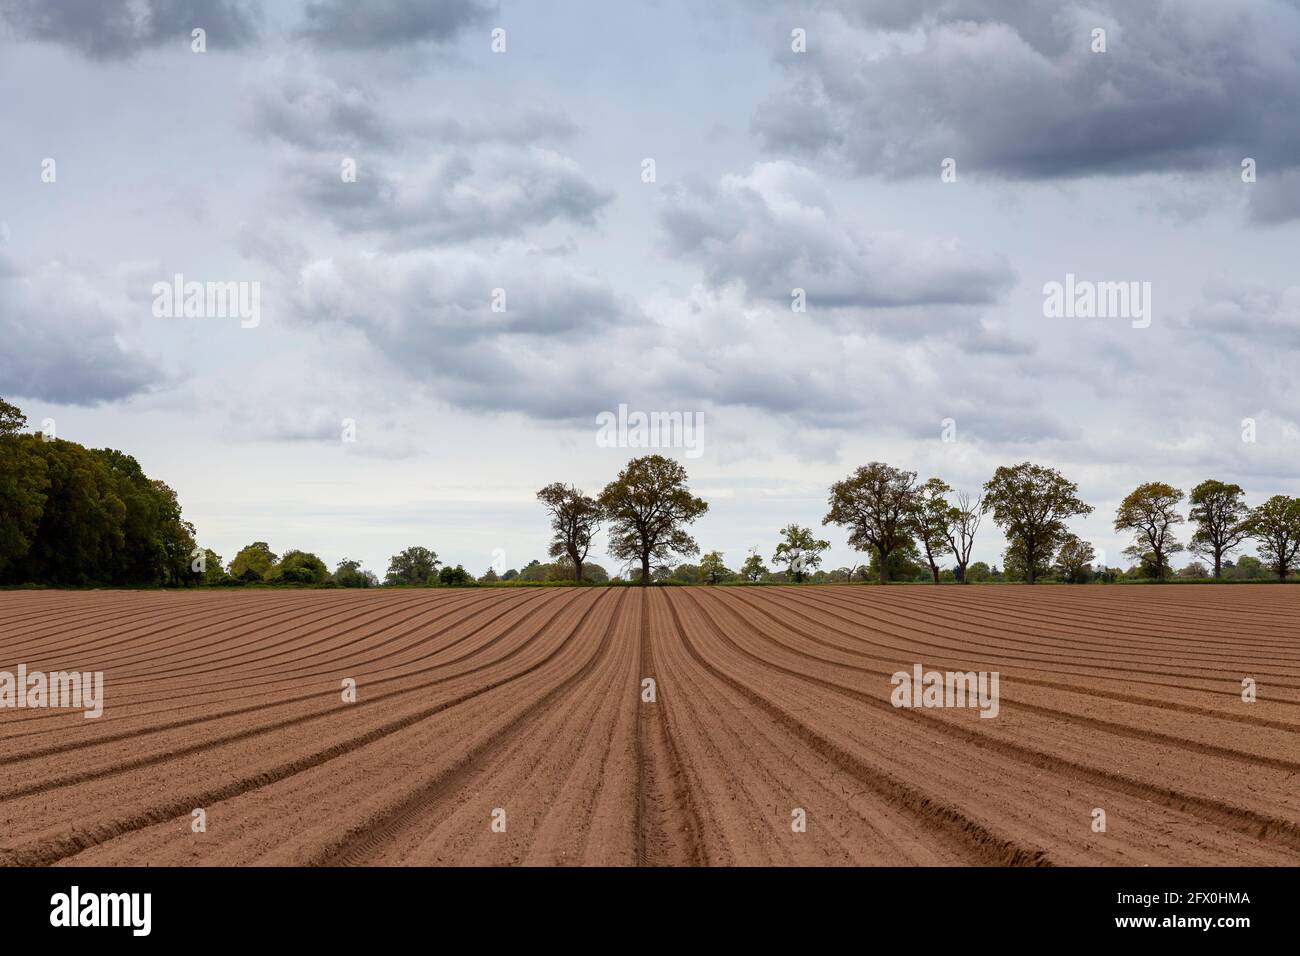 A rich-red soil field recently ploughed with many straight parallel lines with a line of tree silhouettes on the horizon Stock Photo